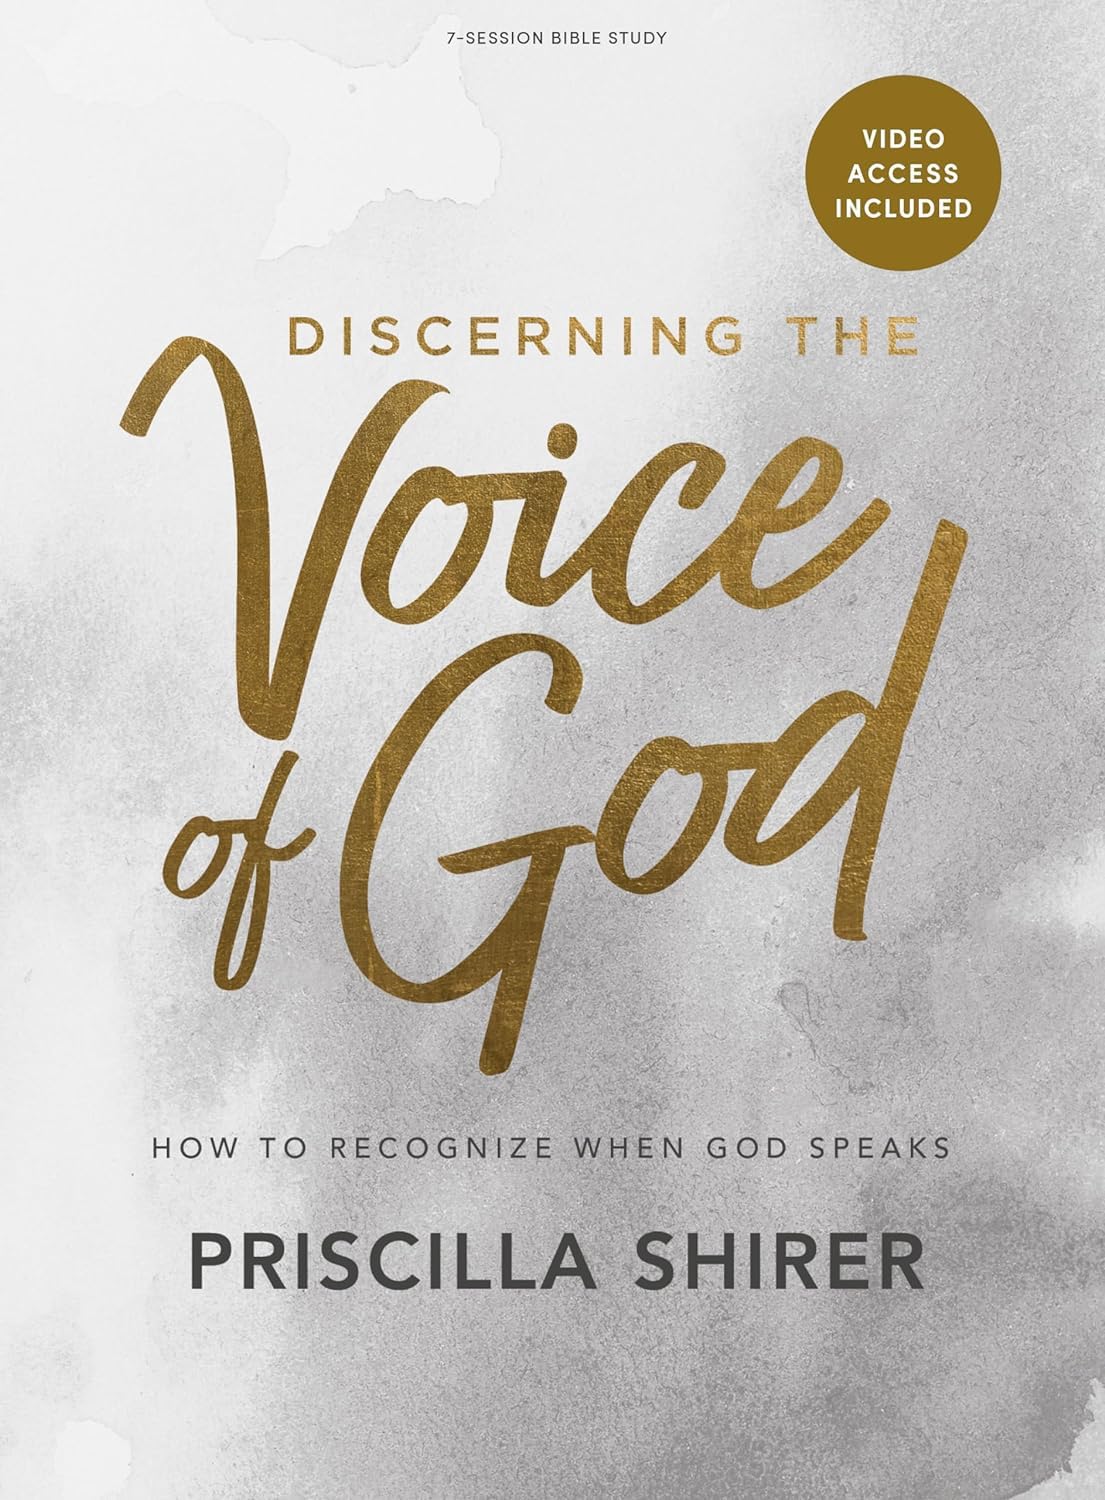 Discerning the Voice of God - Bible Study Book with Video Access: How to Recognize When God Speaks by Shirer, Priscilla